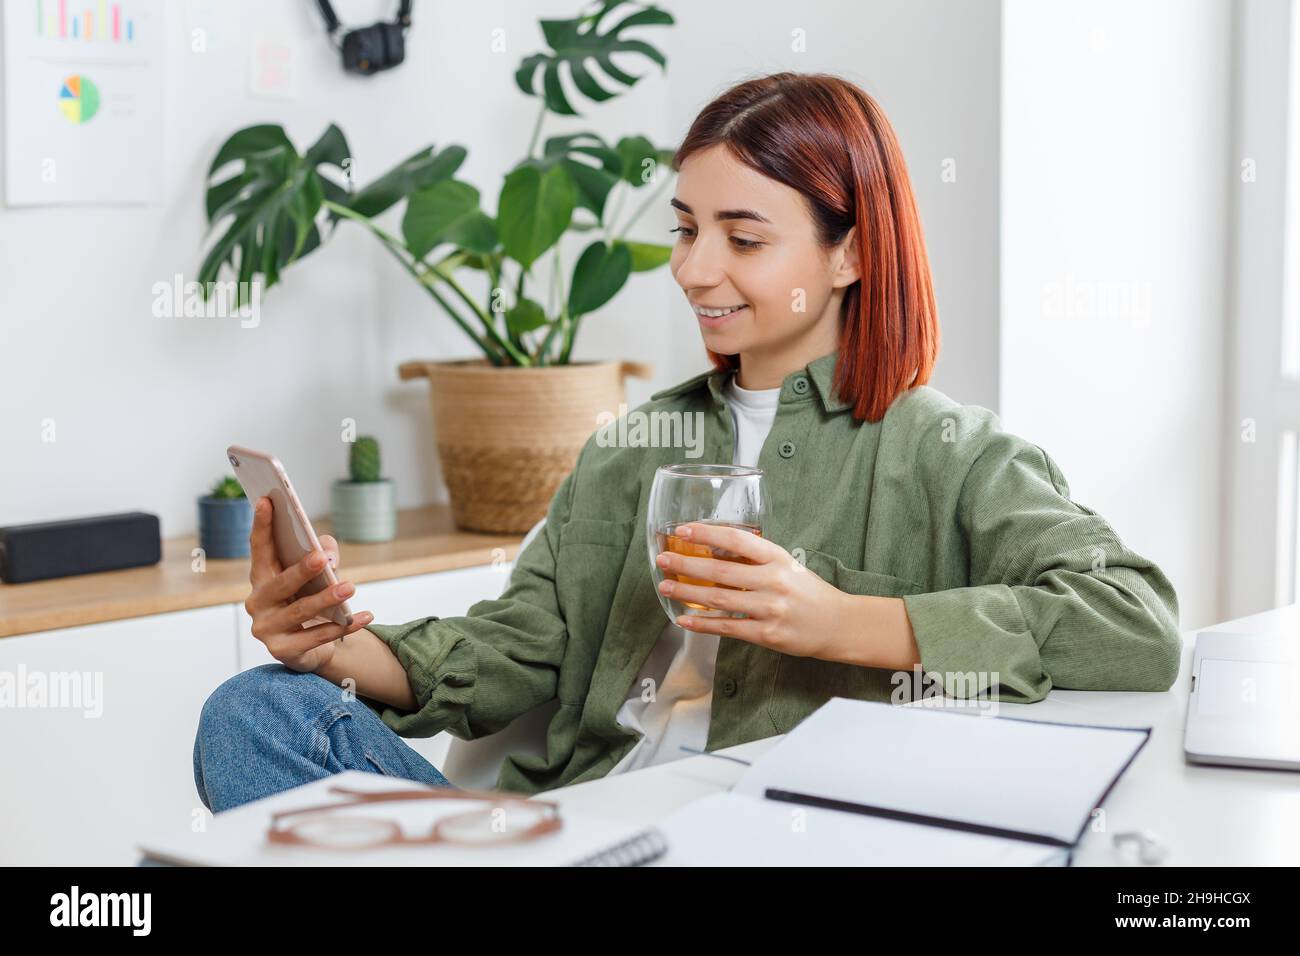 Woman using mobile phone and drinking tea. Young businesswoman at comfortable workplace. Concept of online business or communication, home office and Stock Photo